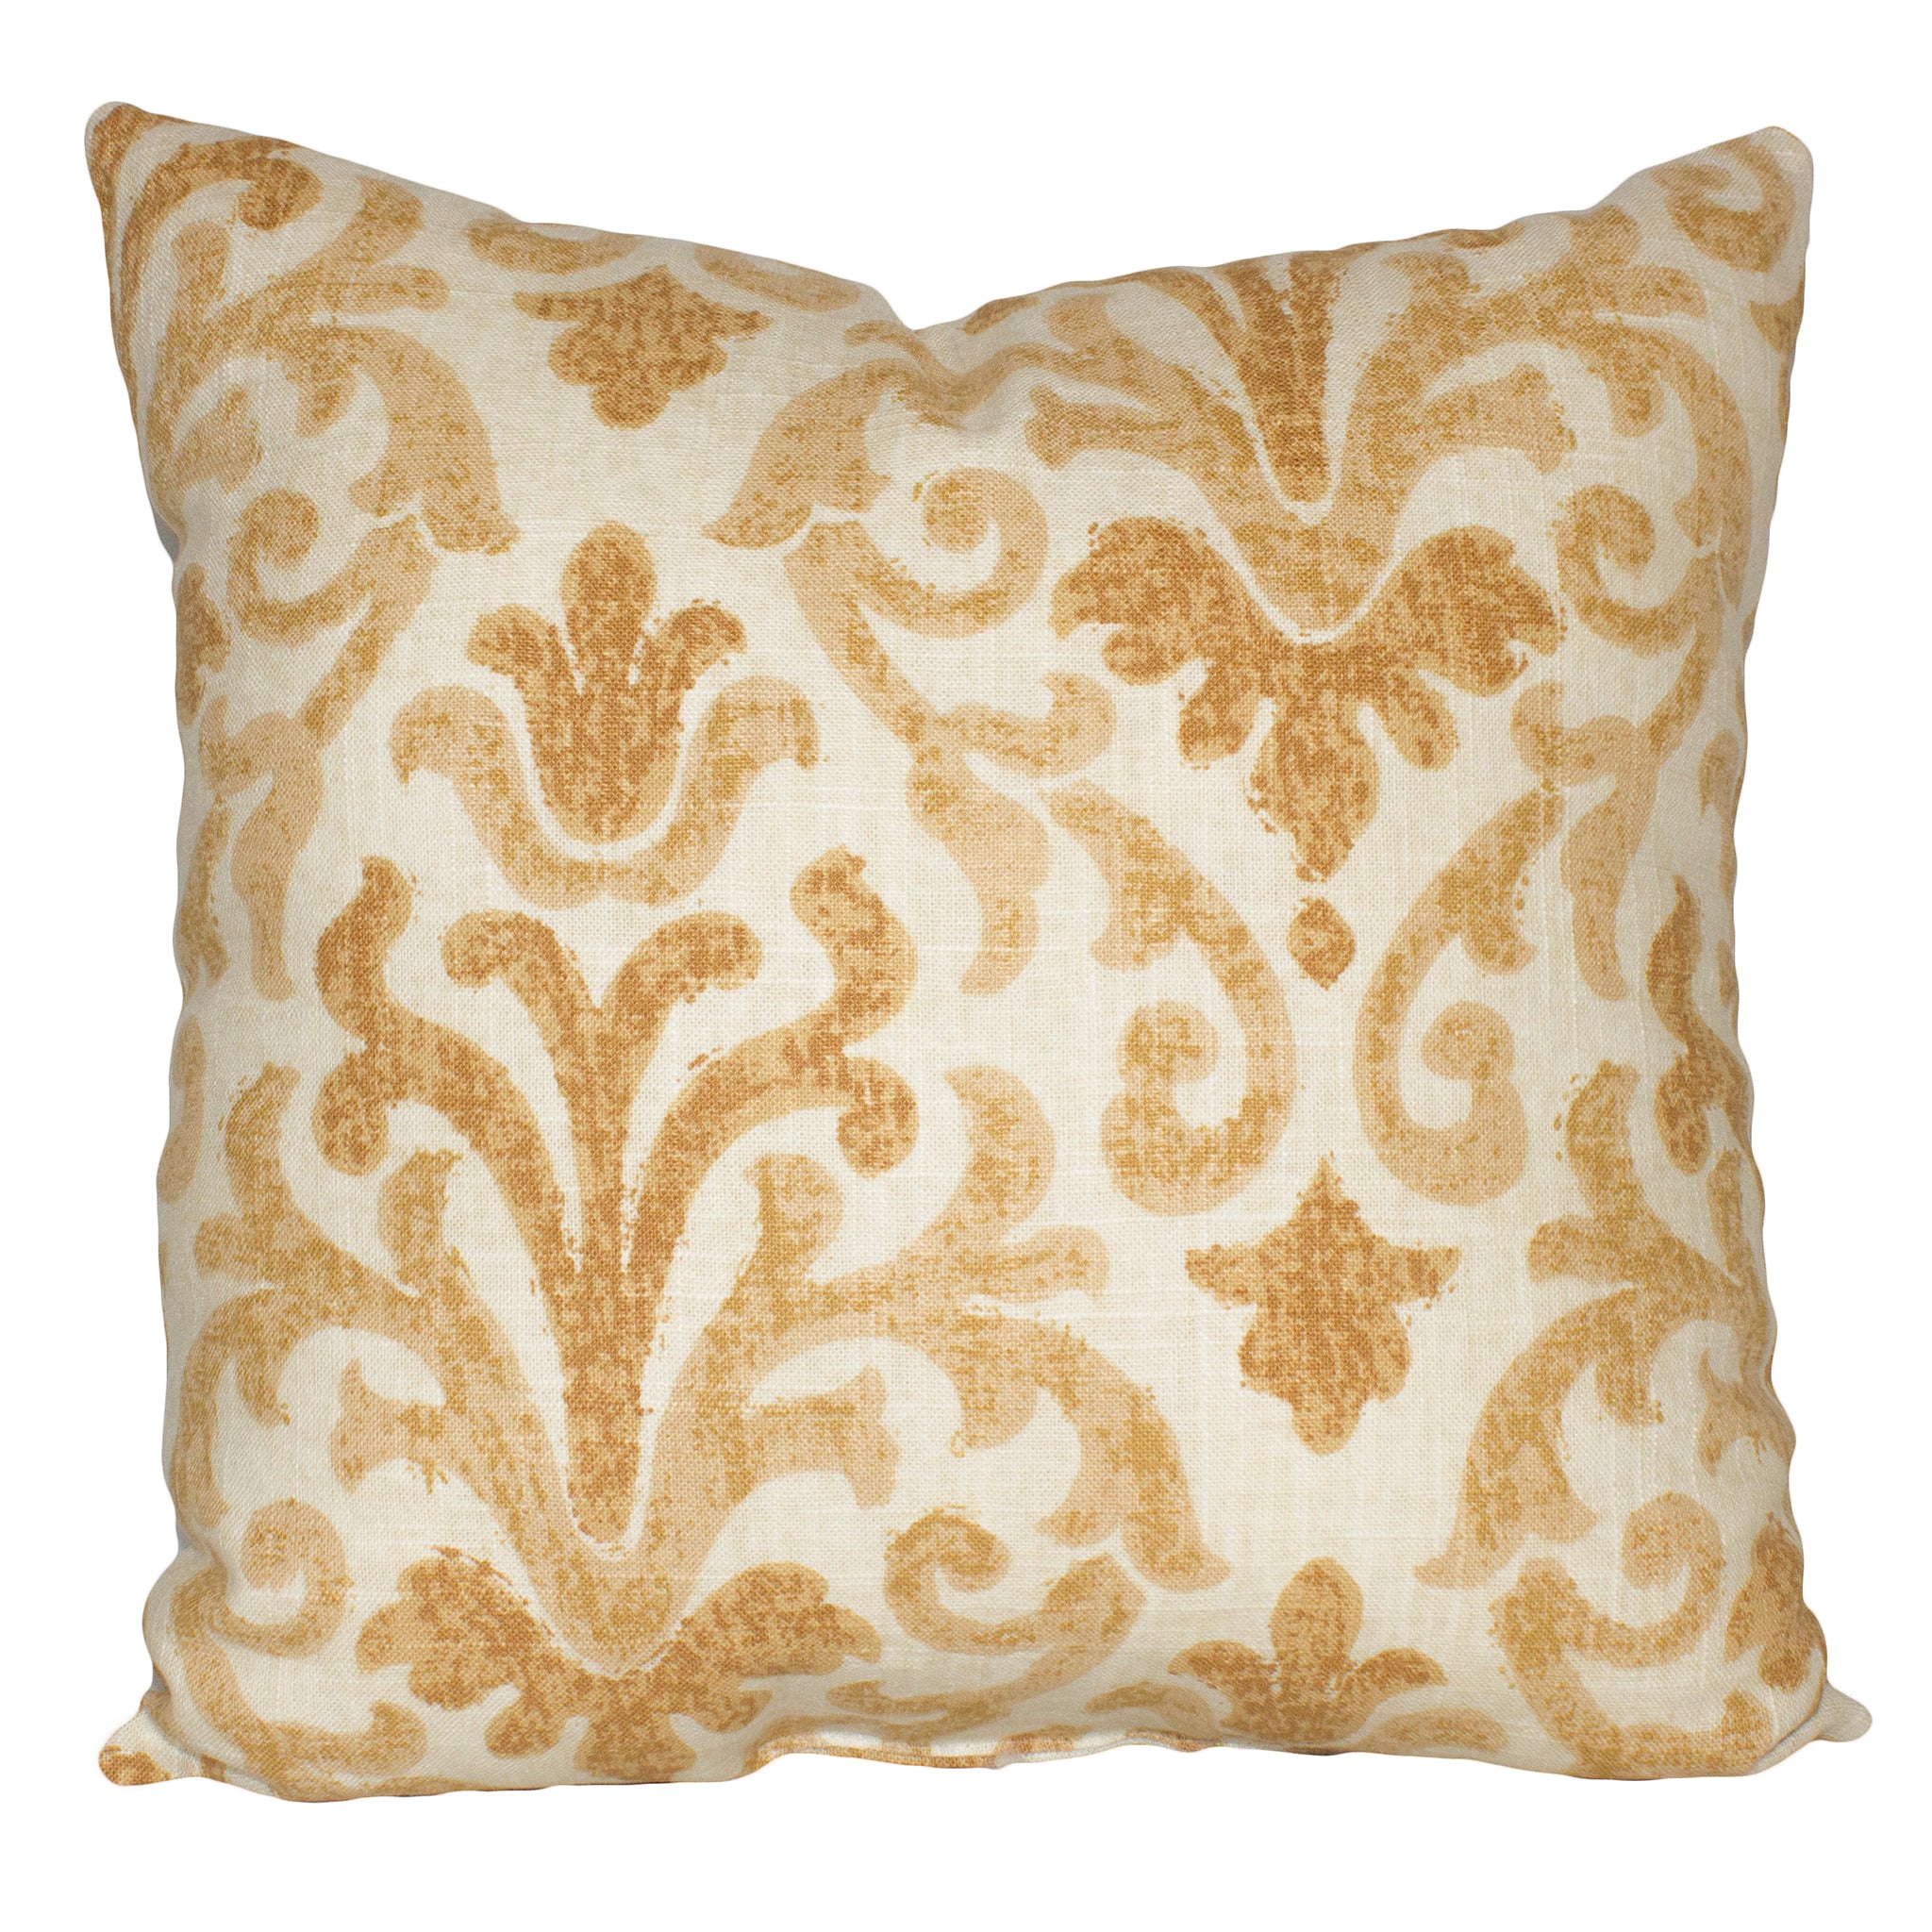 Stenciled Pillow